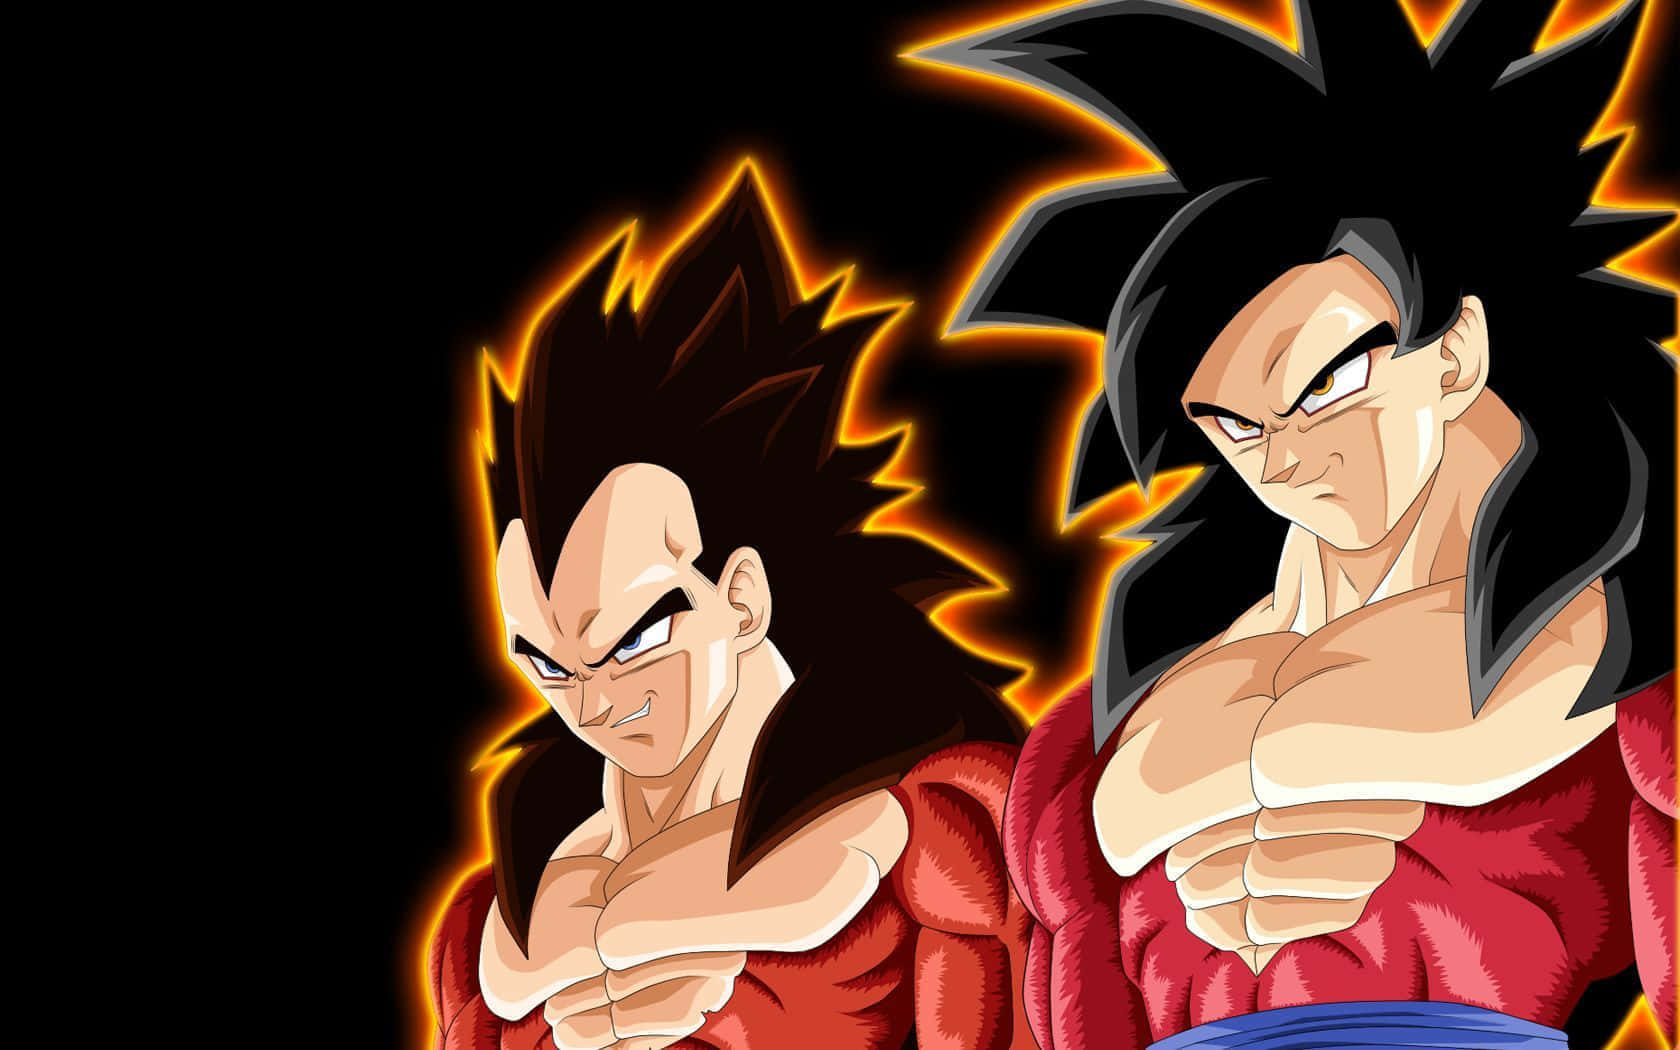 “The strength and power of a Super Saiyan 4” Wallpaper